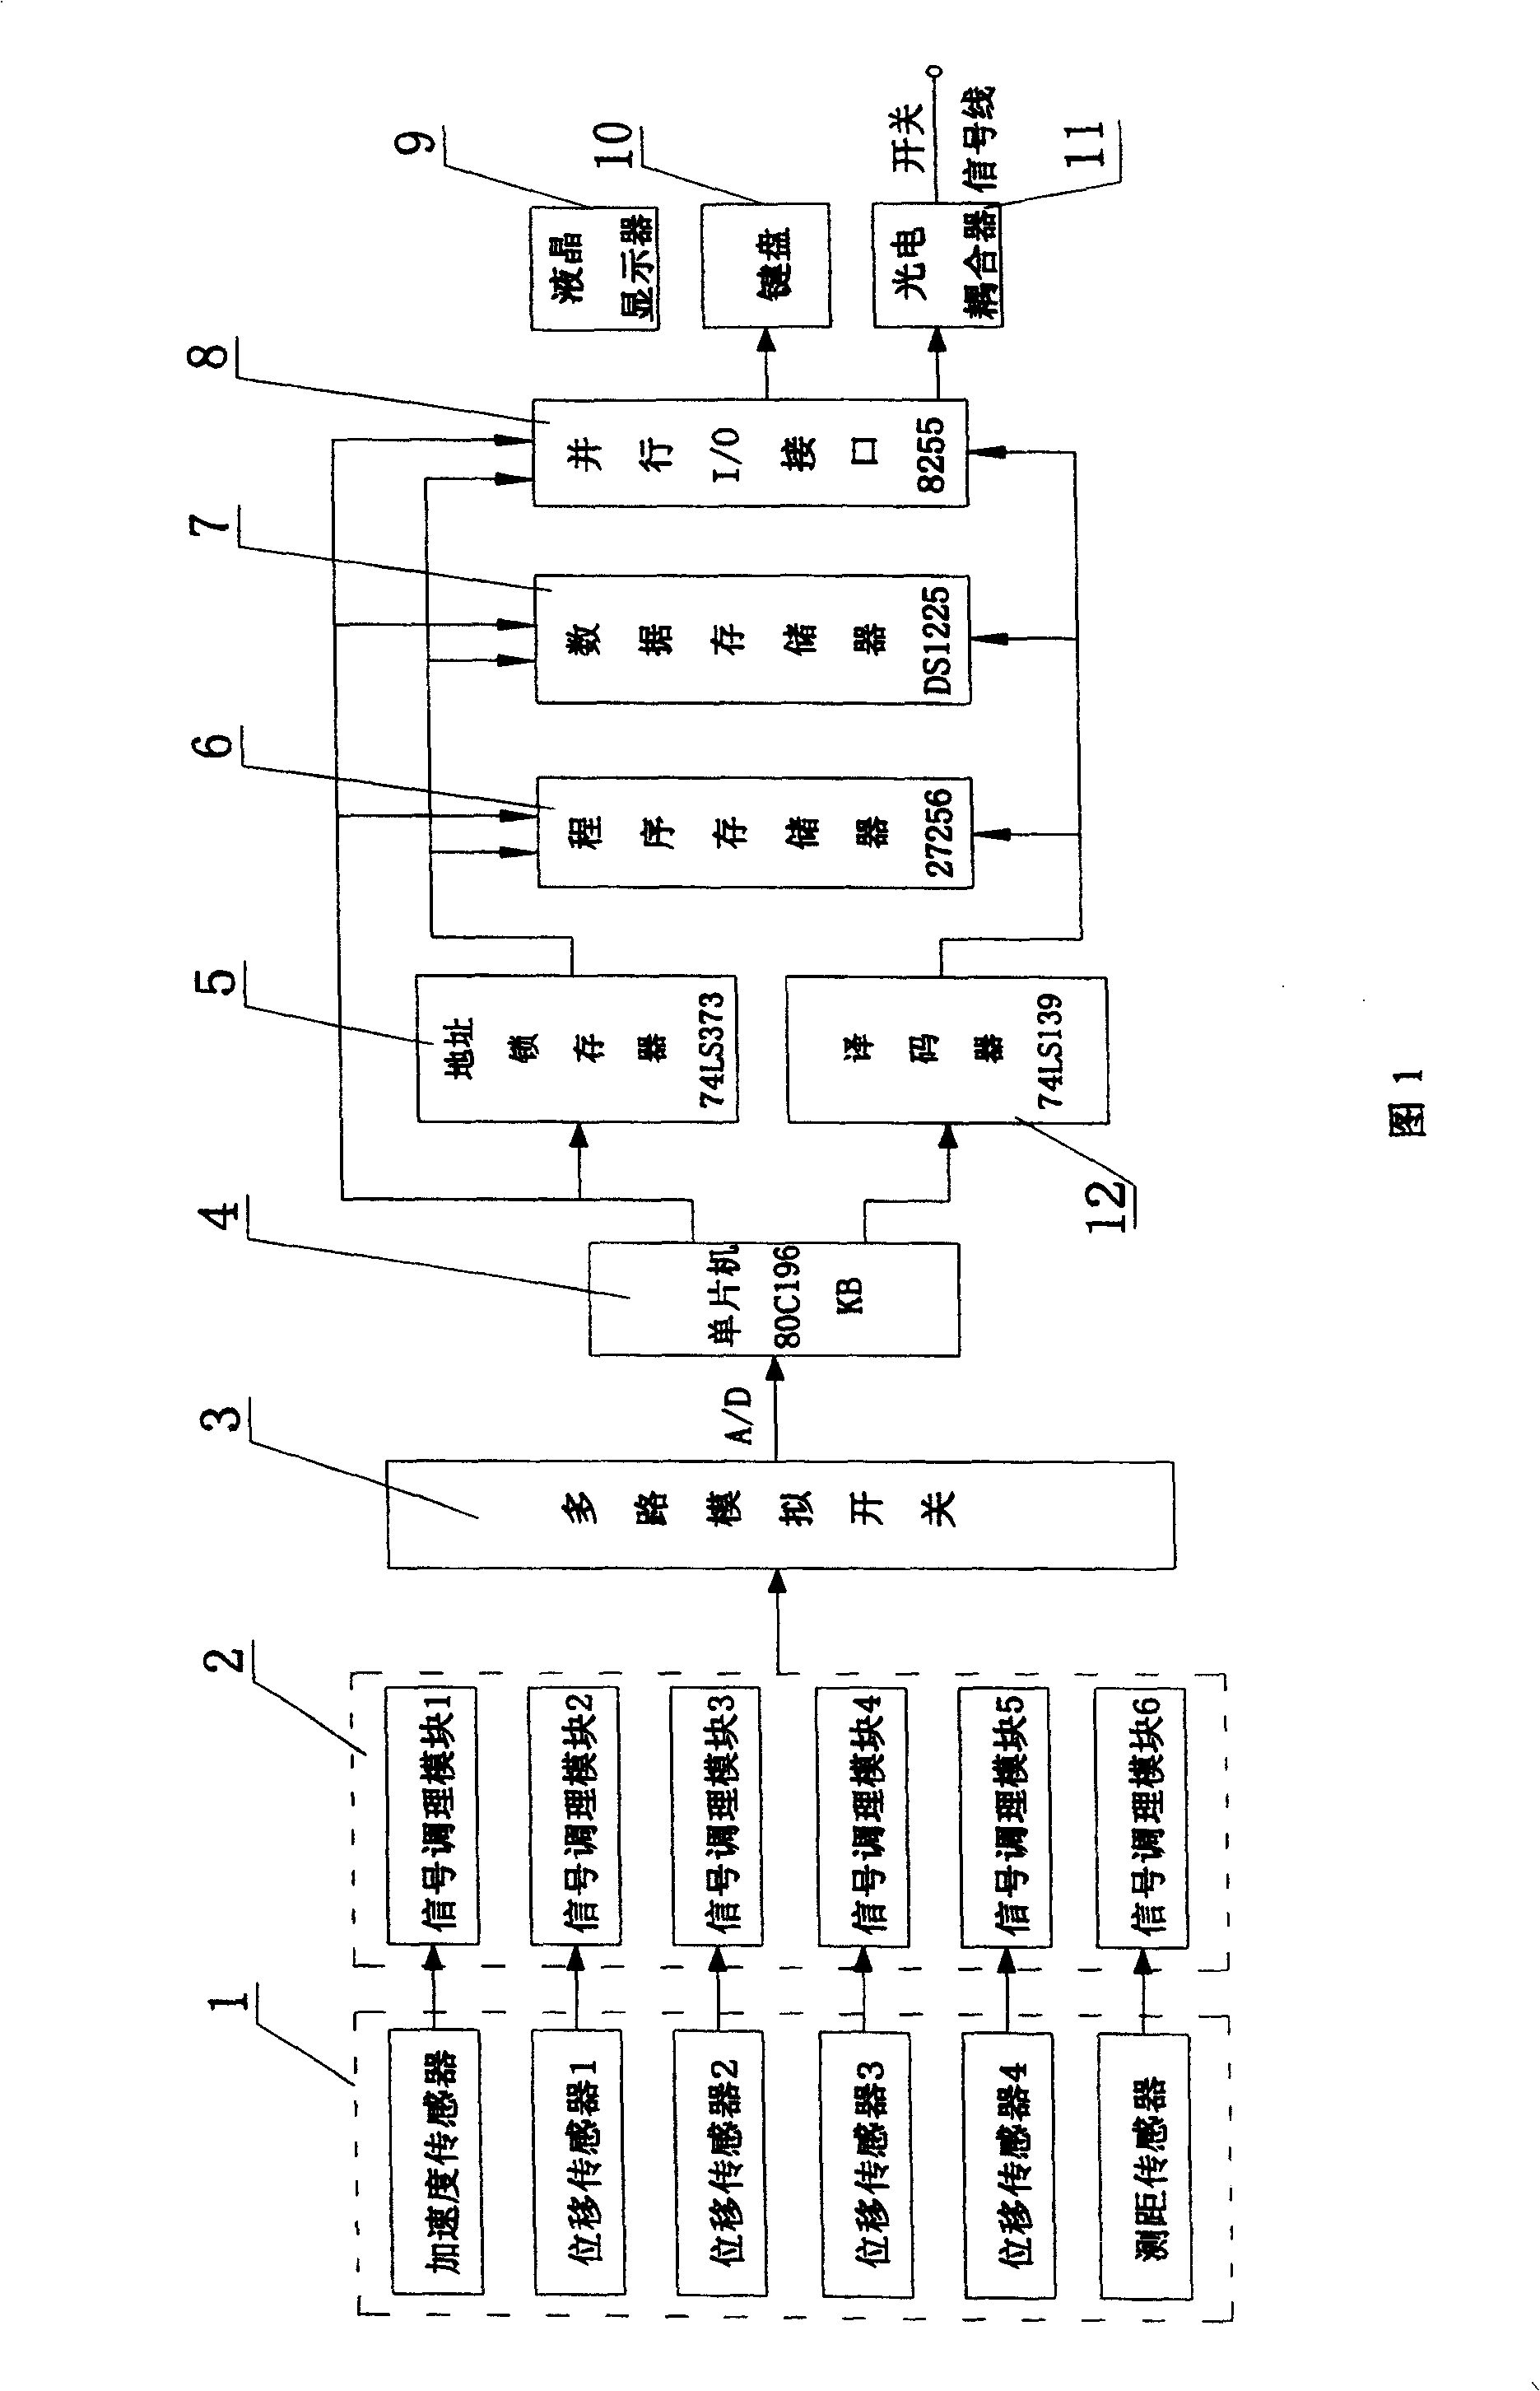 Device and method of detecting braking performance of safety catcher